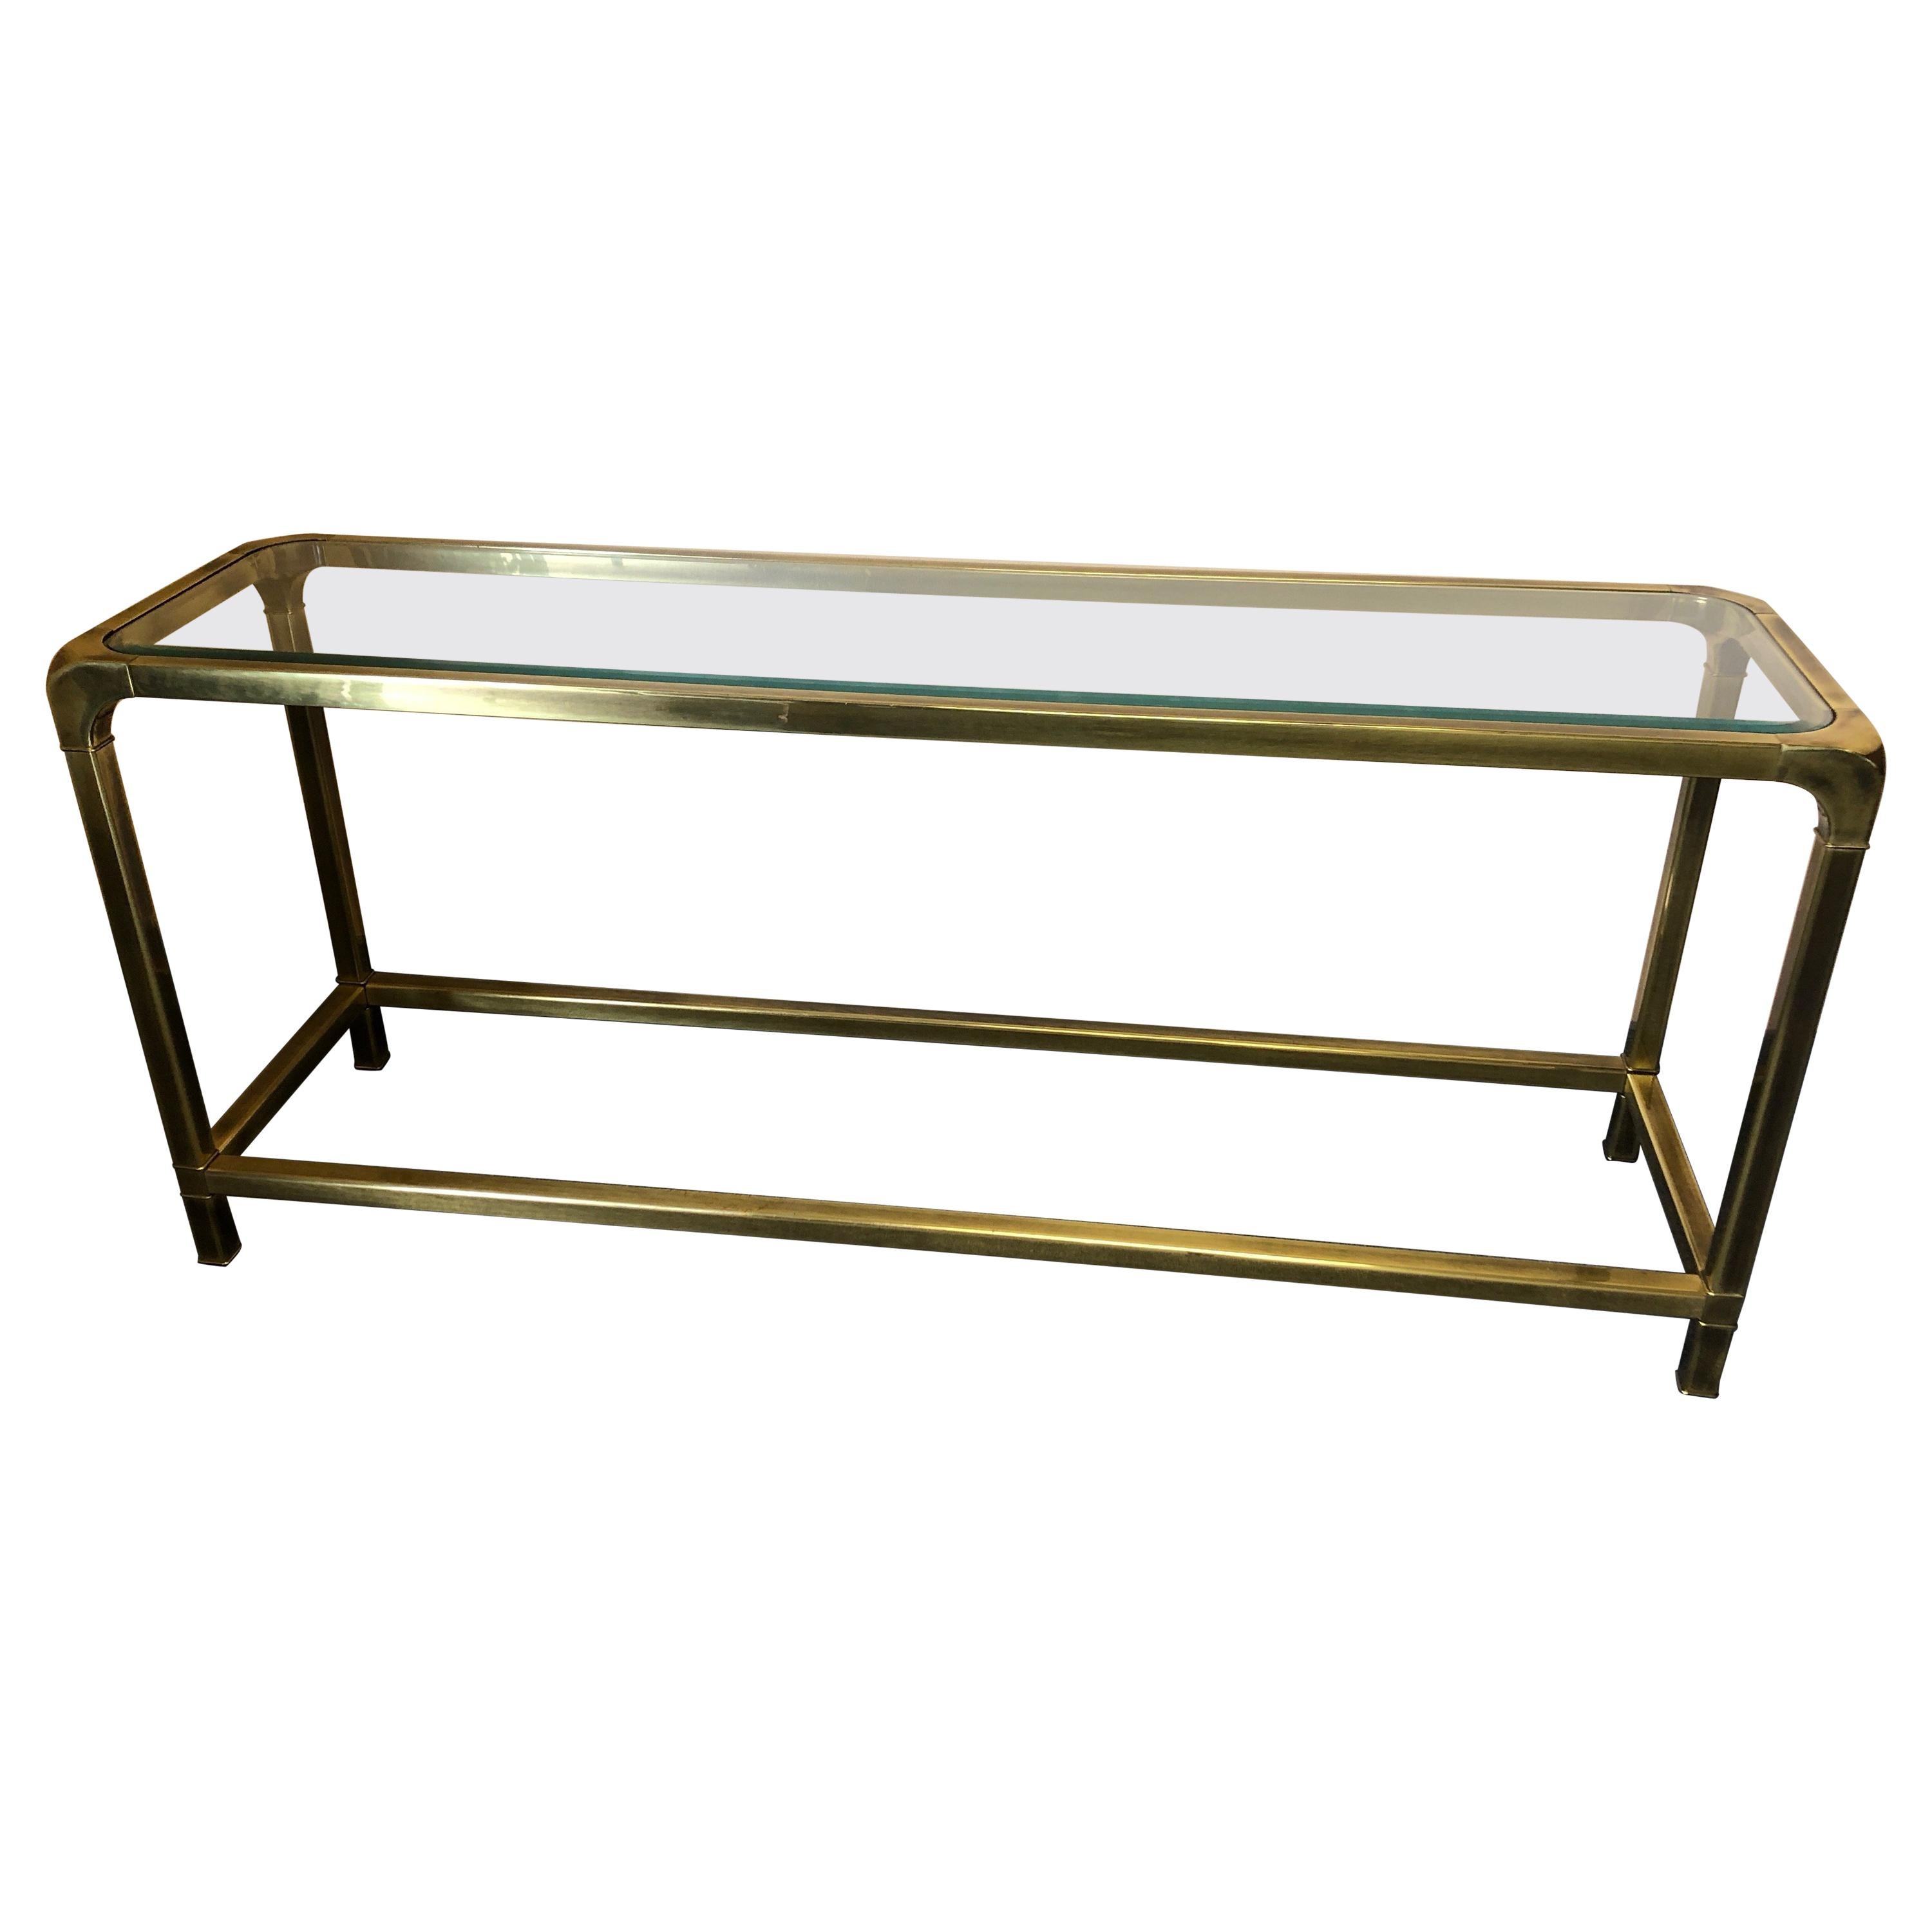 Chic Mastercraft Mid-Century Modern Brass and Glass Console or Sofaback Table